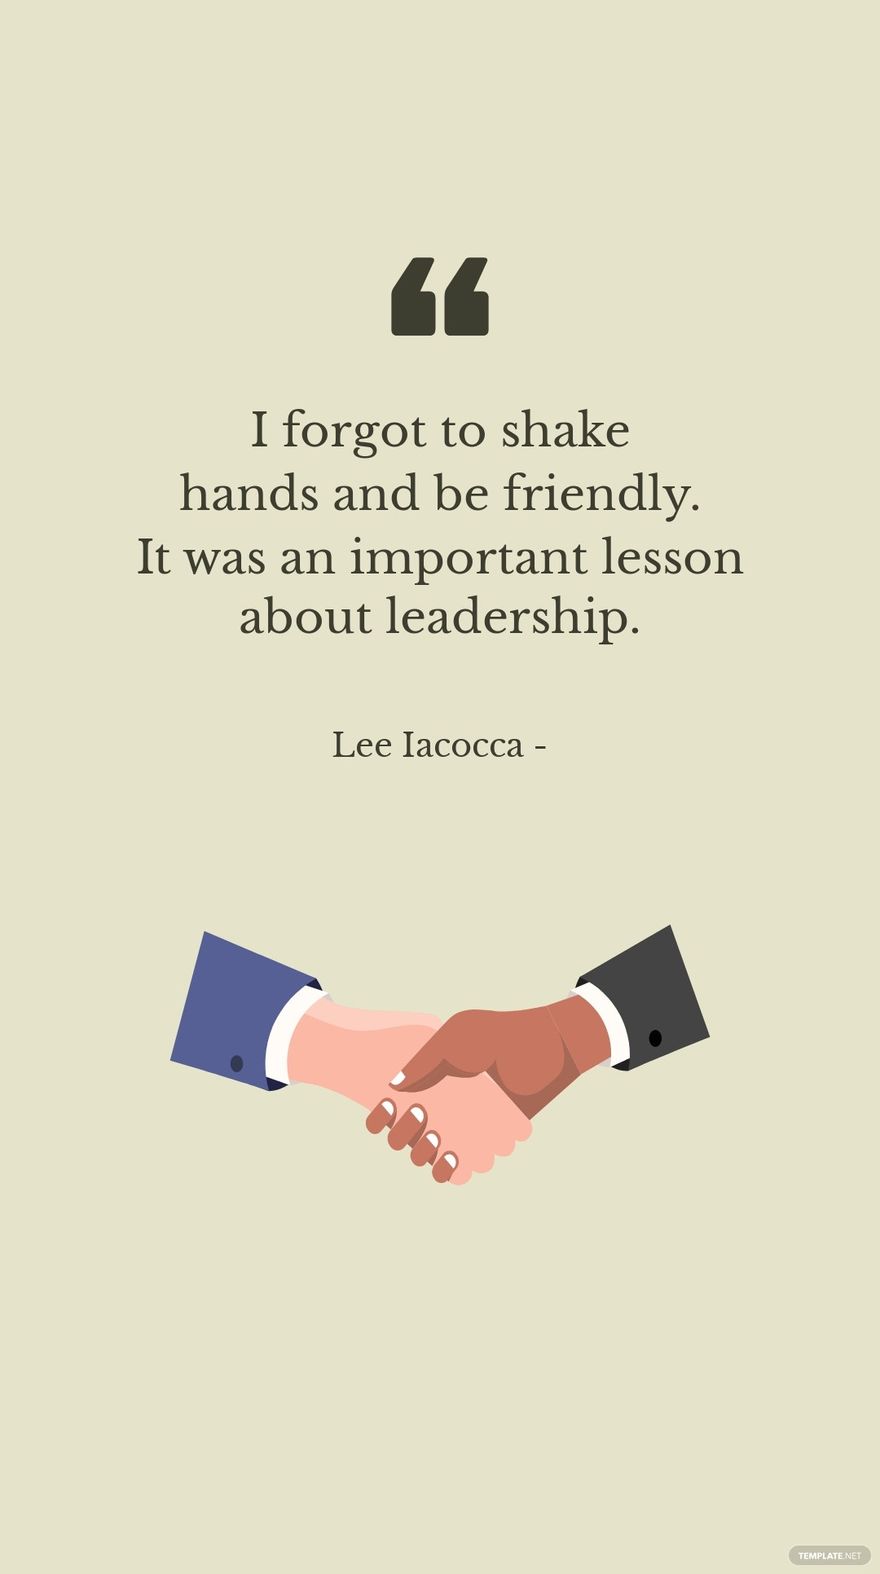 Lee Iacocca - I forgot to shake hands and be friendly. It was an important lesson about leadership.